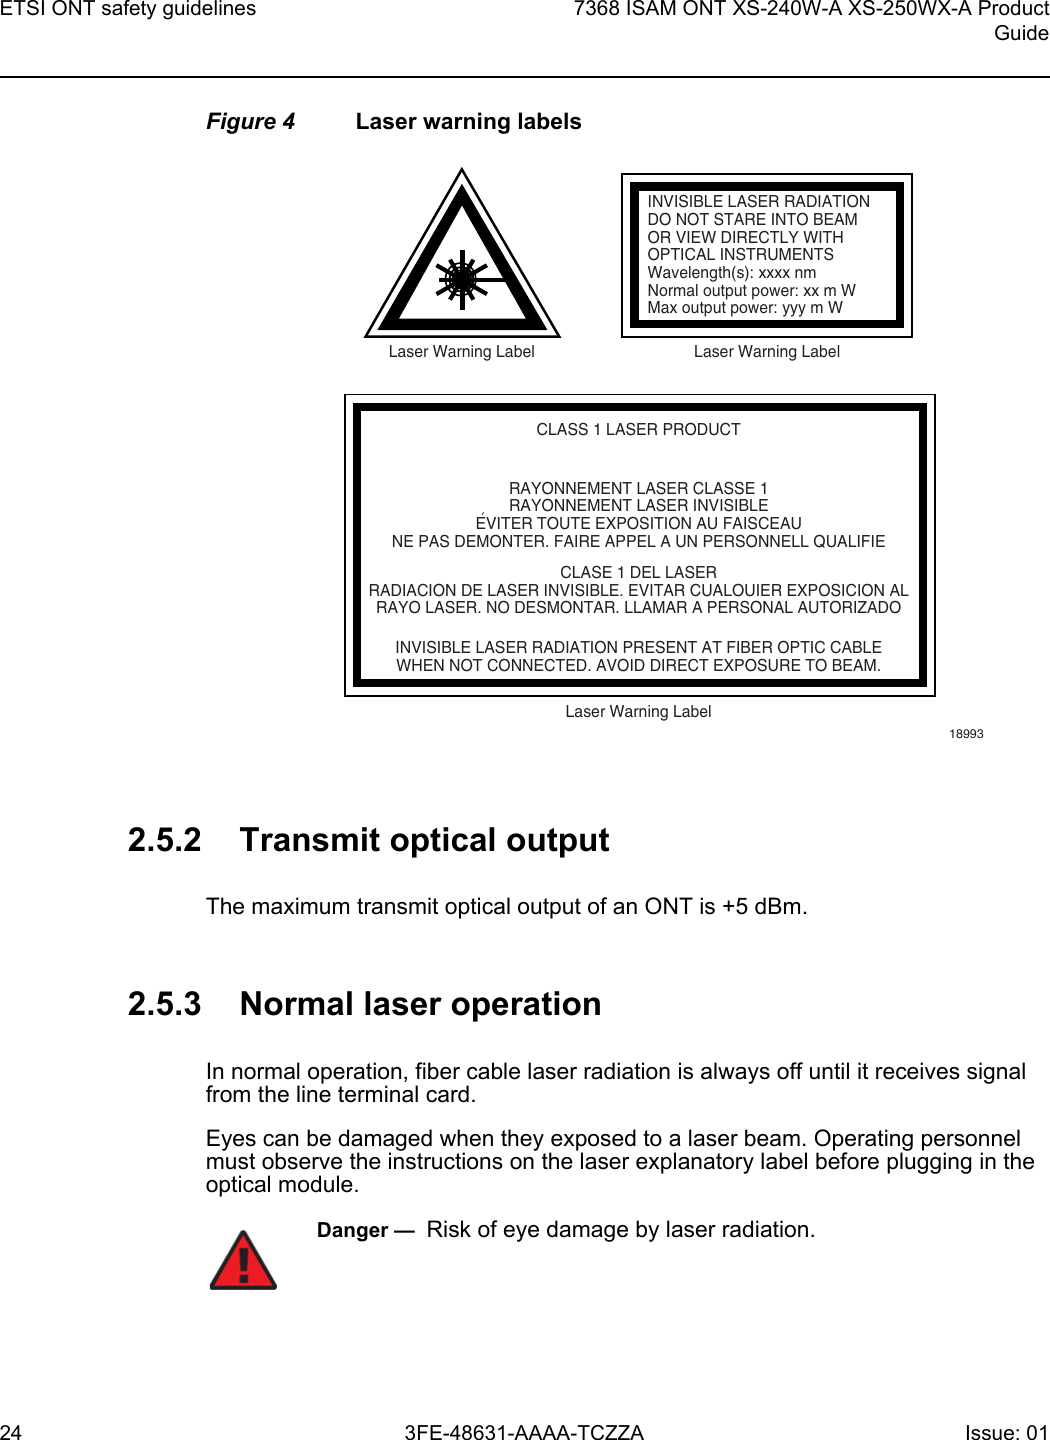 ETSI ONT safety guidelines247368 ISAM ONT XS-240W-A XS-250WX-A ProductGuide3FE-48631-AAAA-TCZZA Issue: 01 Figure 4 Laser warning labels2.5.2 Transmit optical outputThe maximum transmit optical output of an ONT is +5 dBm.2.5.3 Normal laser operationIn normal operation, fiber cable laser radiation is always off until it receives signal from the line terminal card.Eyes can be damaged when they exposed to a laser beam. Operating personnel must observe the instructions on the laser explanatory label before plugging in the optical module.INVISIBLE LASER RADIATIONDO NOT STARE INTO BEAMOR VIEW DIRECTLY WITHOPTICAL INSTRUMENTSWavelength(s): xxxx nmNormal output power: xx m WMax output power: yyy m WLaser Warning Label Laser Warning LabelCLASS 1 LASER PRODUCTINVISIBLE LASER RADIATION PRESENT AT FIBER OPTIC CABLEWHEN NOT CONNECTED. AVOID DIRECT EXPOSURE TO BEAM.RAYONNEMENT LASER CLASSE 1RAYONNEMENT LASER INVISIBLEEVITER TOUTE EXPOSITION AU FAISCEAUNE PAS DEMONTER. FAIRE APPEL A UN PERSONNELL QUALIFIECLASE 1 DEL LASERRADIACION DE LASER INVISIBLE. EVITAR CUALOUIER EXPOSICION ALRAYO LASER. NO DESMONTAR. LLAMAR A PERSONAL AUTORIZADOLaser Warning Label18993&apos;Danger —  Risk of eye damage by laser radiation.